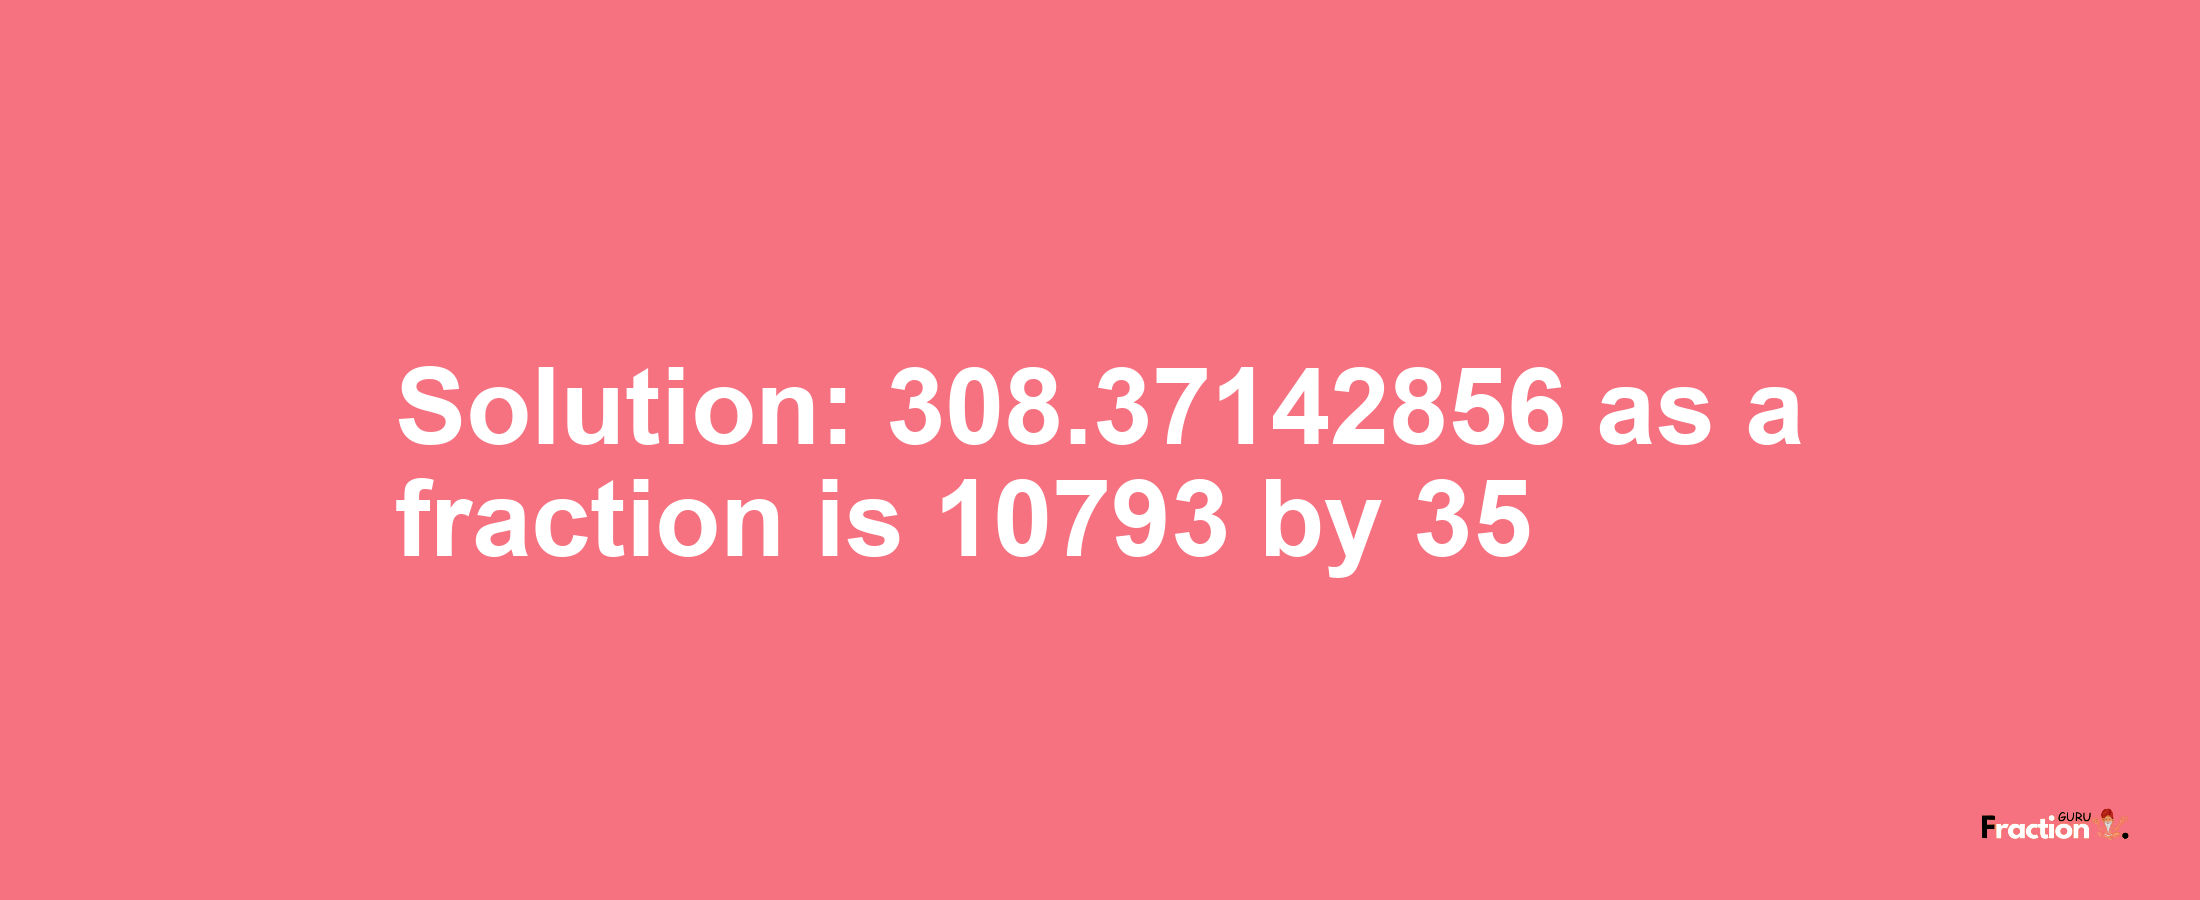 Solution:308.37142856 as a fraction is 10793/35